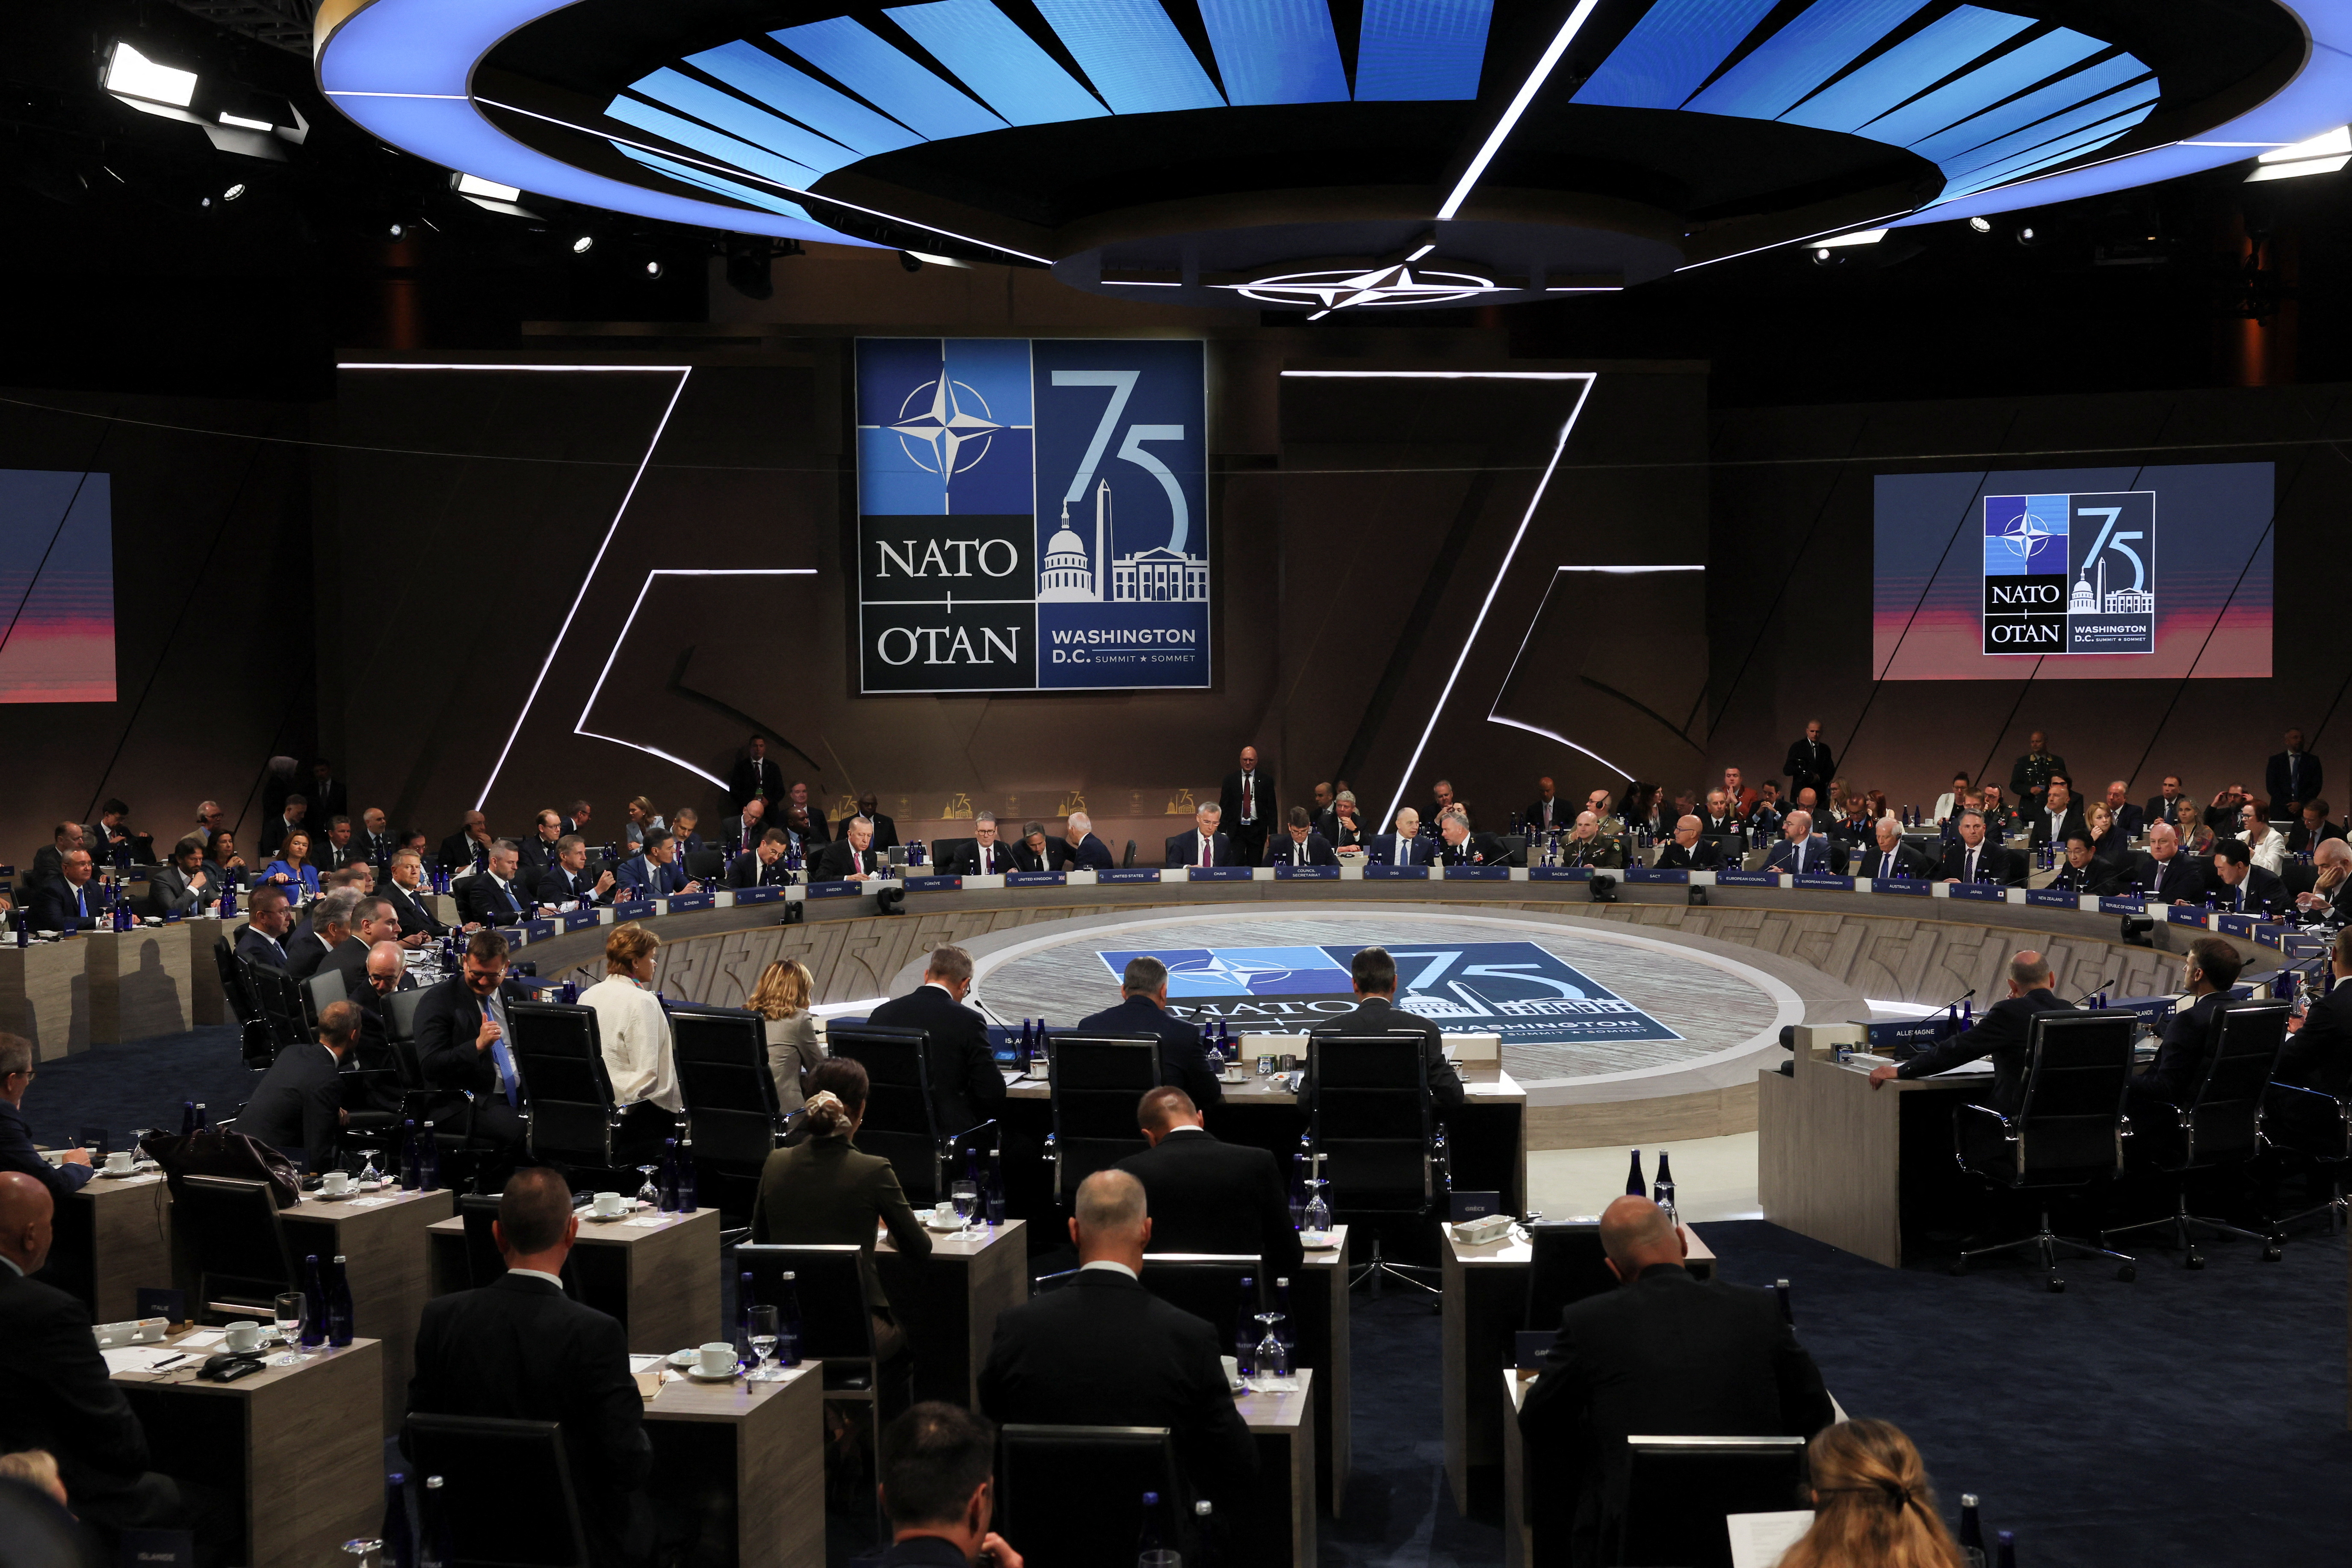 Working session at NATO's 75th anniversary summit in Washington